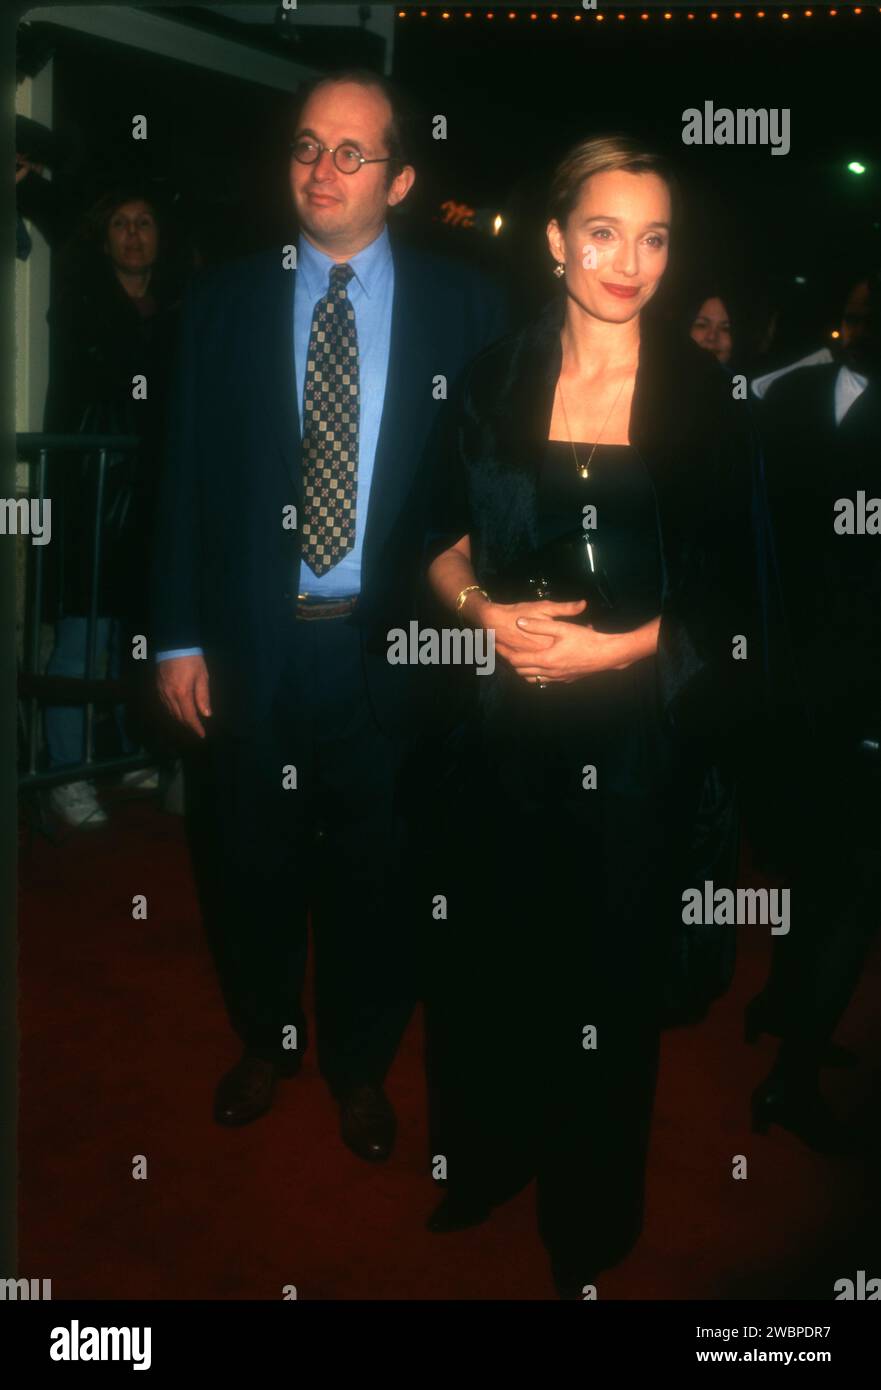 Los Angeles, California, USA 6th November 1996 Actress Kristin Scott Thomas attends The American Film Institute's Premiere of Miramax Films 'The English Patient' at Mann Bruin Theatre on November 6, 1996 in Los Angeles, California, USA. Photo by Barry King/Alamy Stock Photo Stock Photo